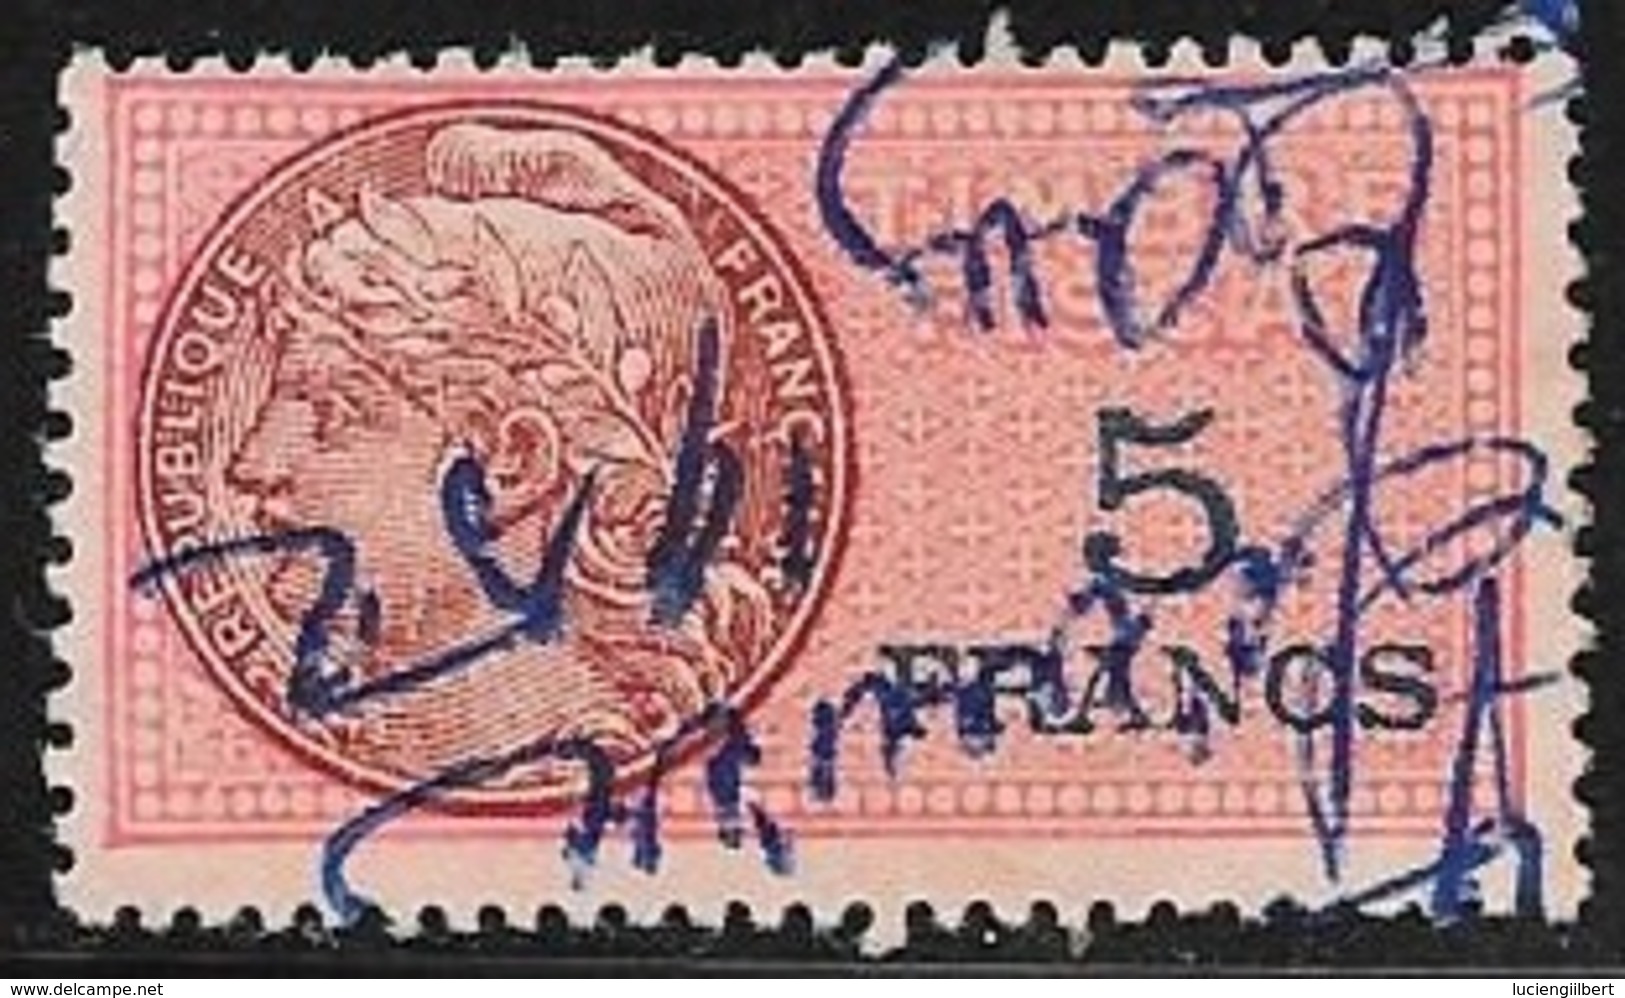 TIMBRE FISCAL N° 137a  -  5 F BLEU SUR ROUGE  -   MEDAILLON DAUSSY FOND ETOILE  -   OBLITERE - Timbres